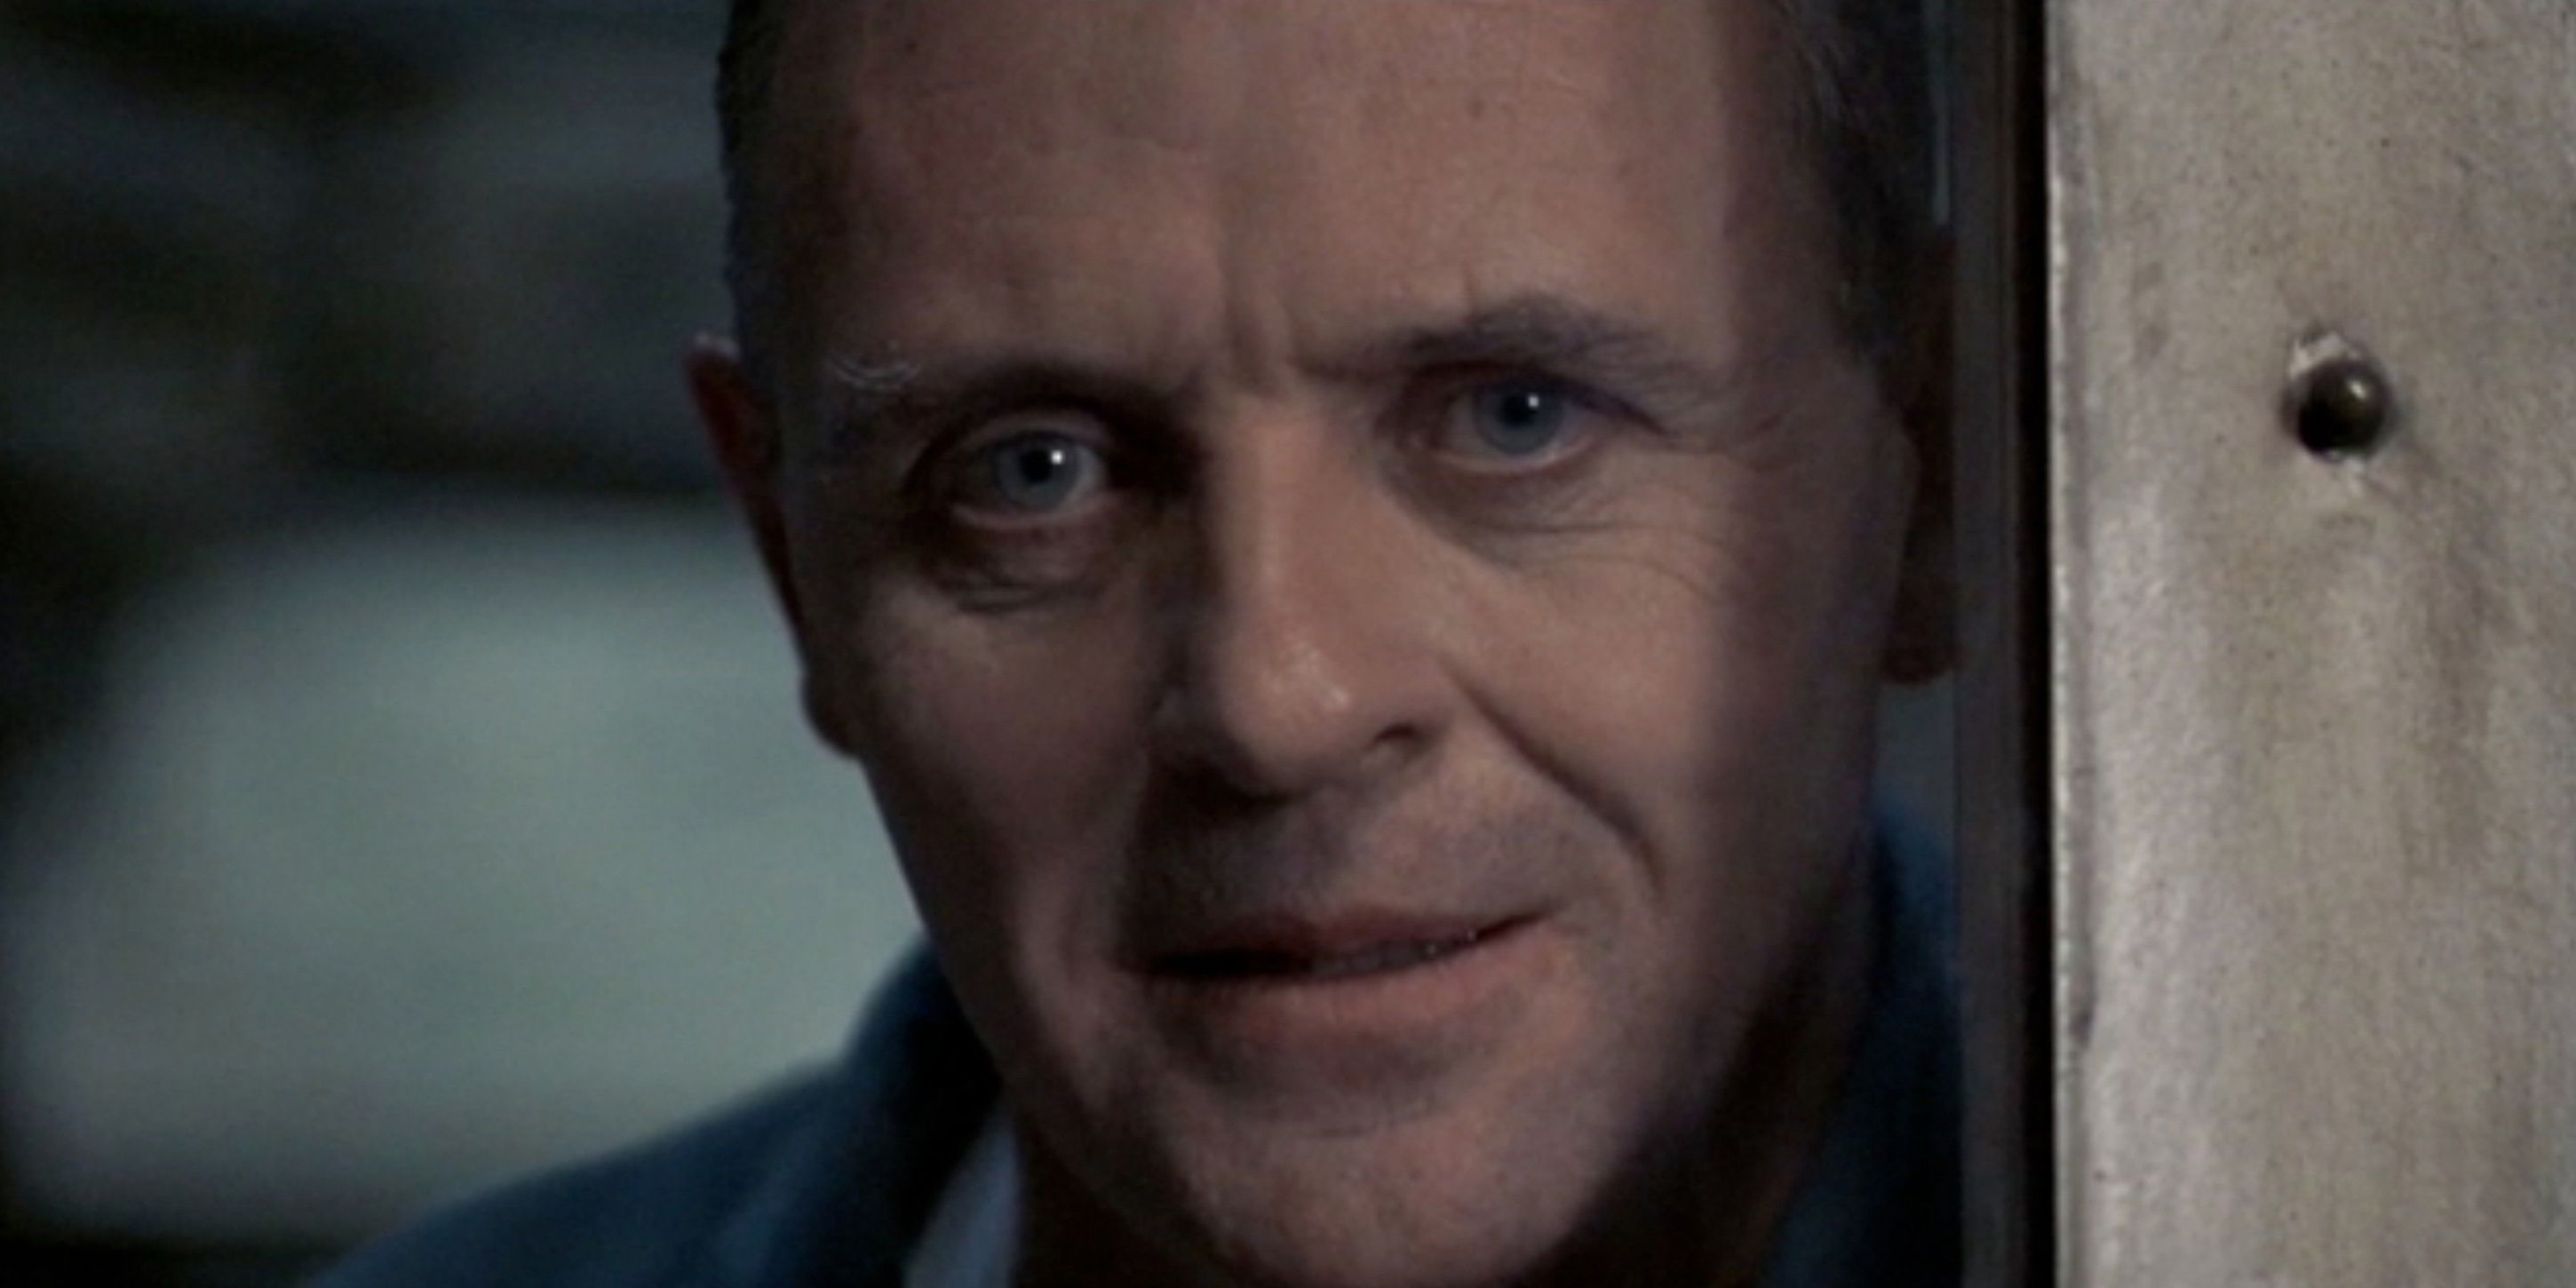 Hannibal Lecter leaning against the glass in The Silence of the Lambs